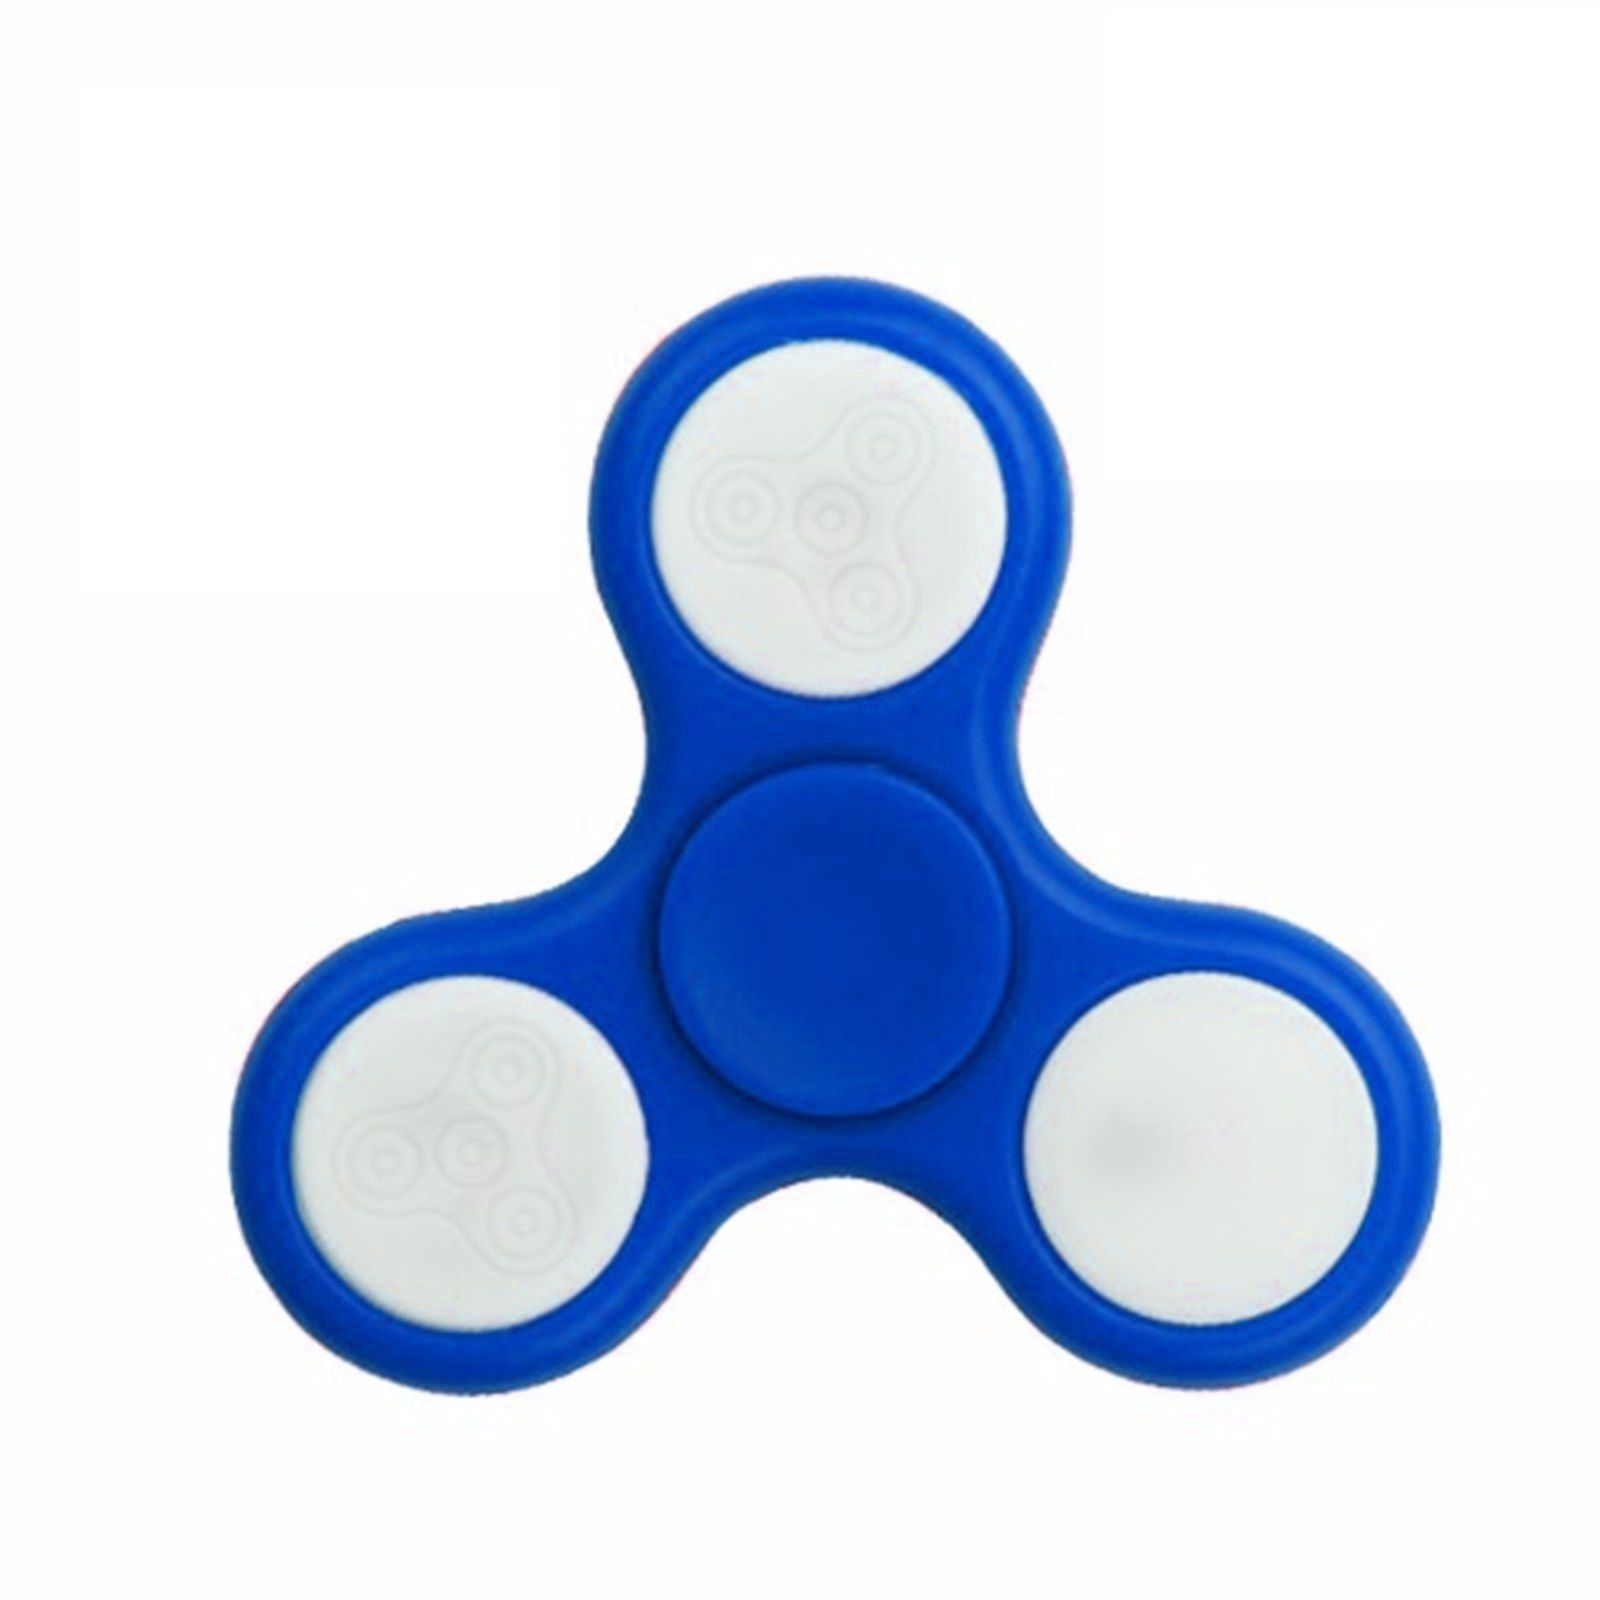 Light Up Color Flashing LED Fidget Spinner Tri-Spinner Hand Spinner Finger Spinner Toy Stress Reducer for Anxiety and Stress Relief - Blue - image 2 of 4